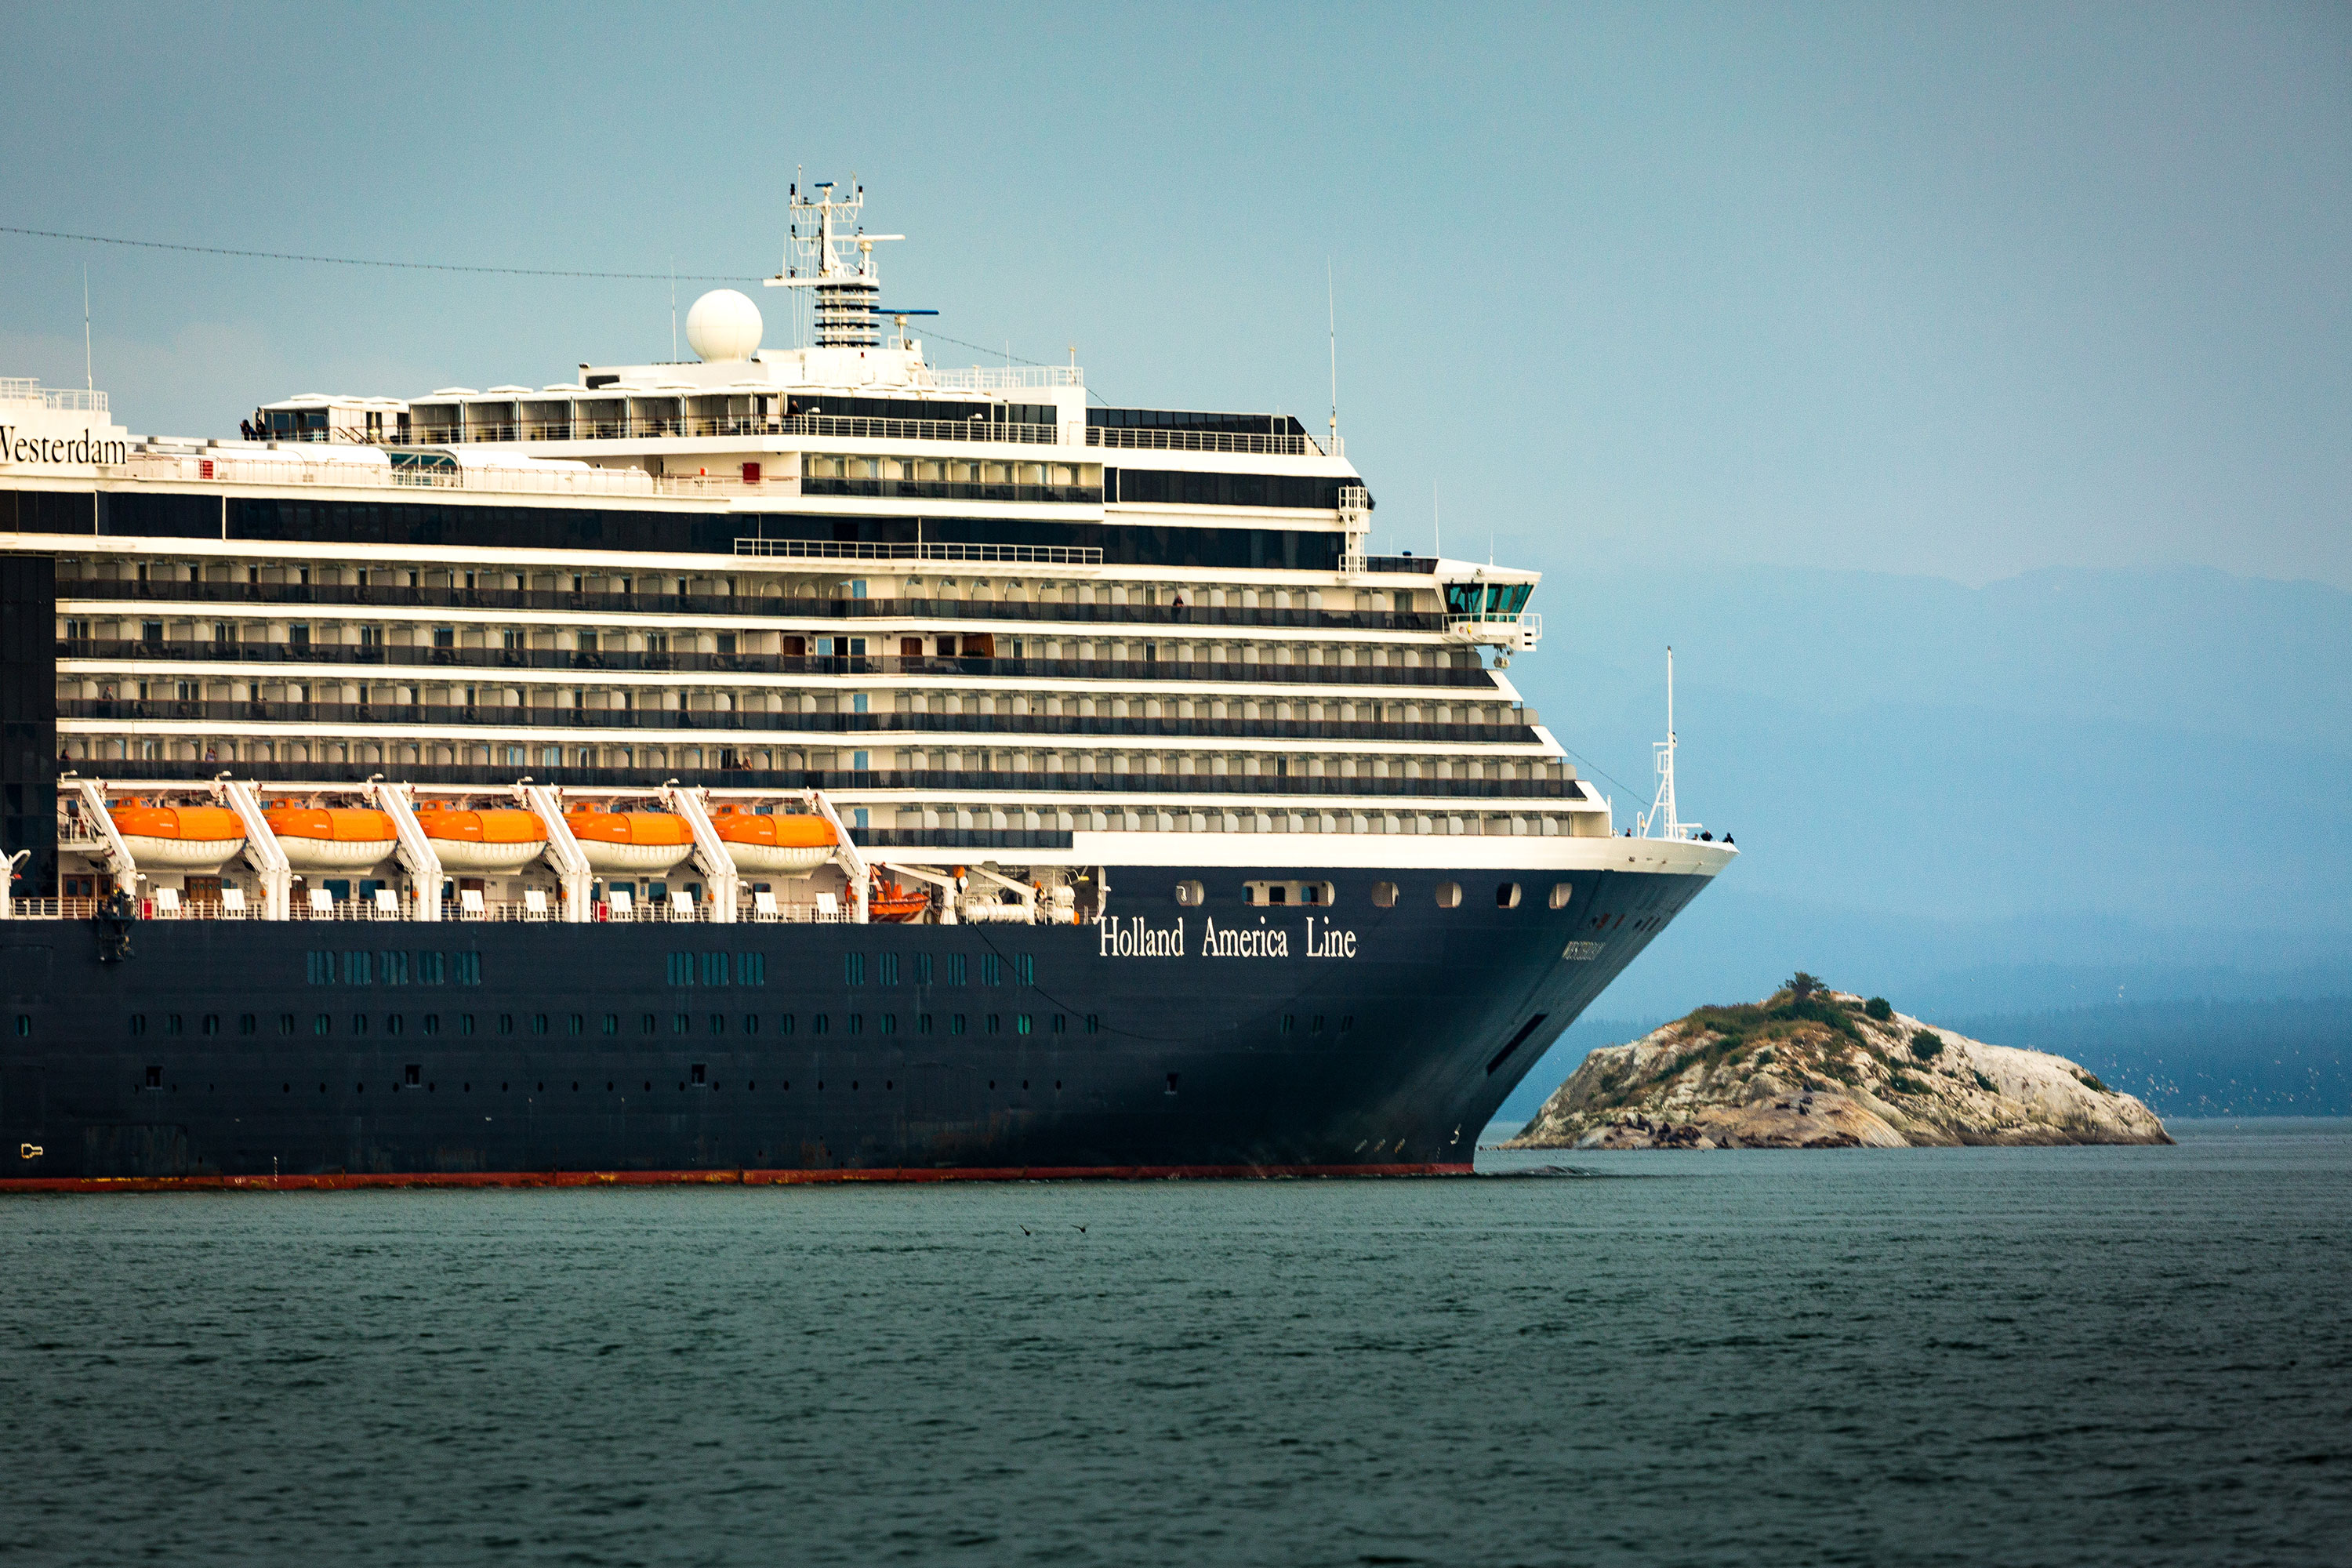 The Westerdam, as seen in 2019.